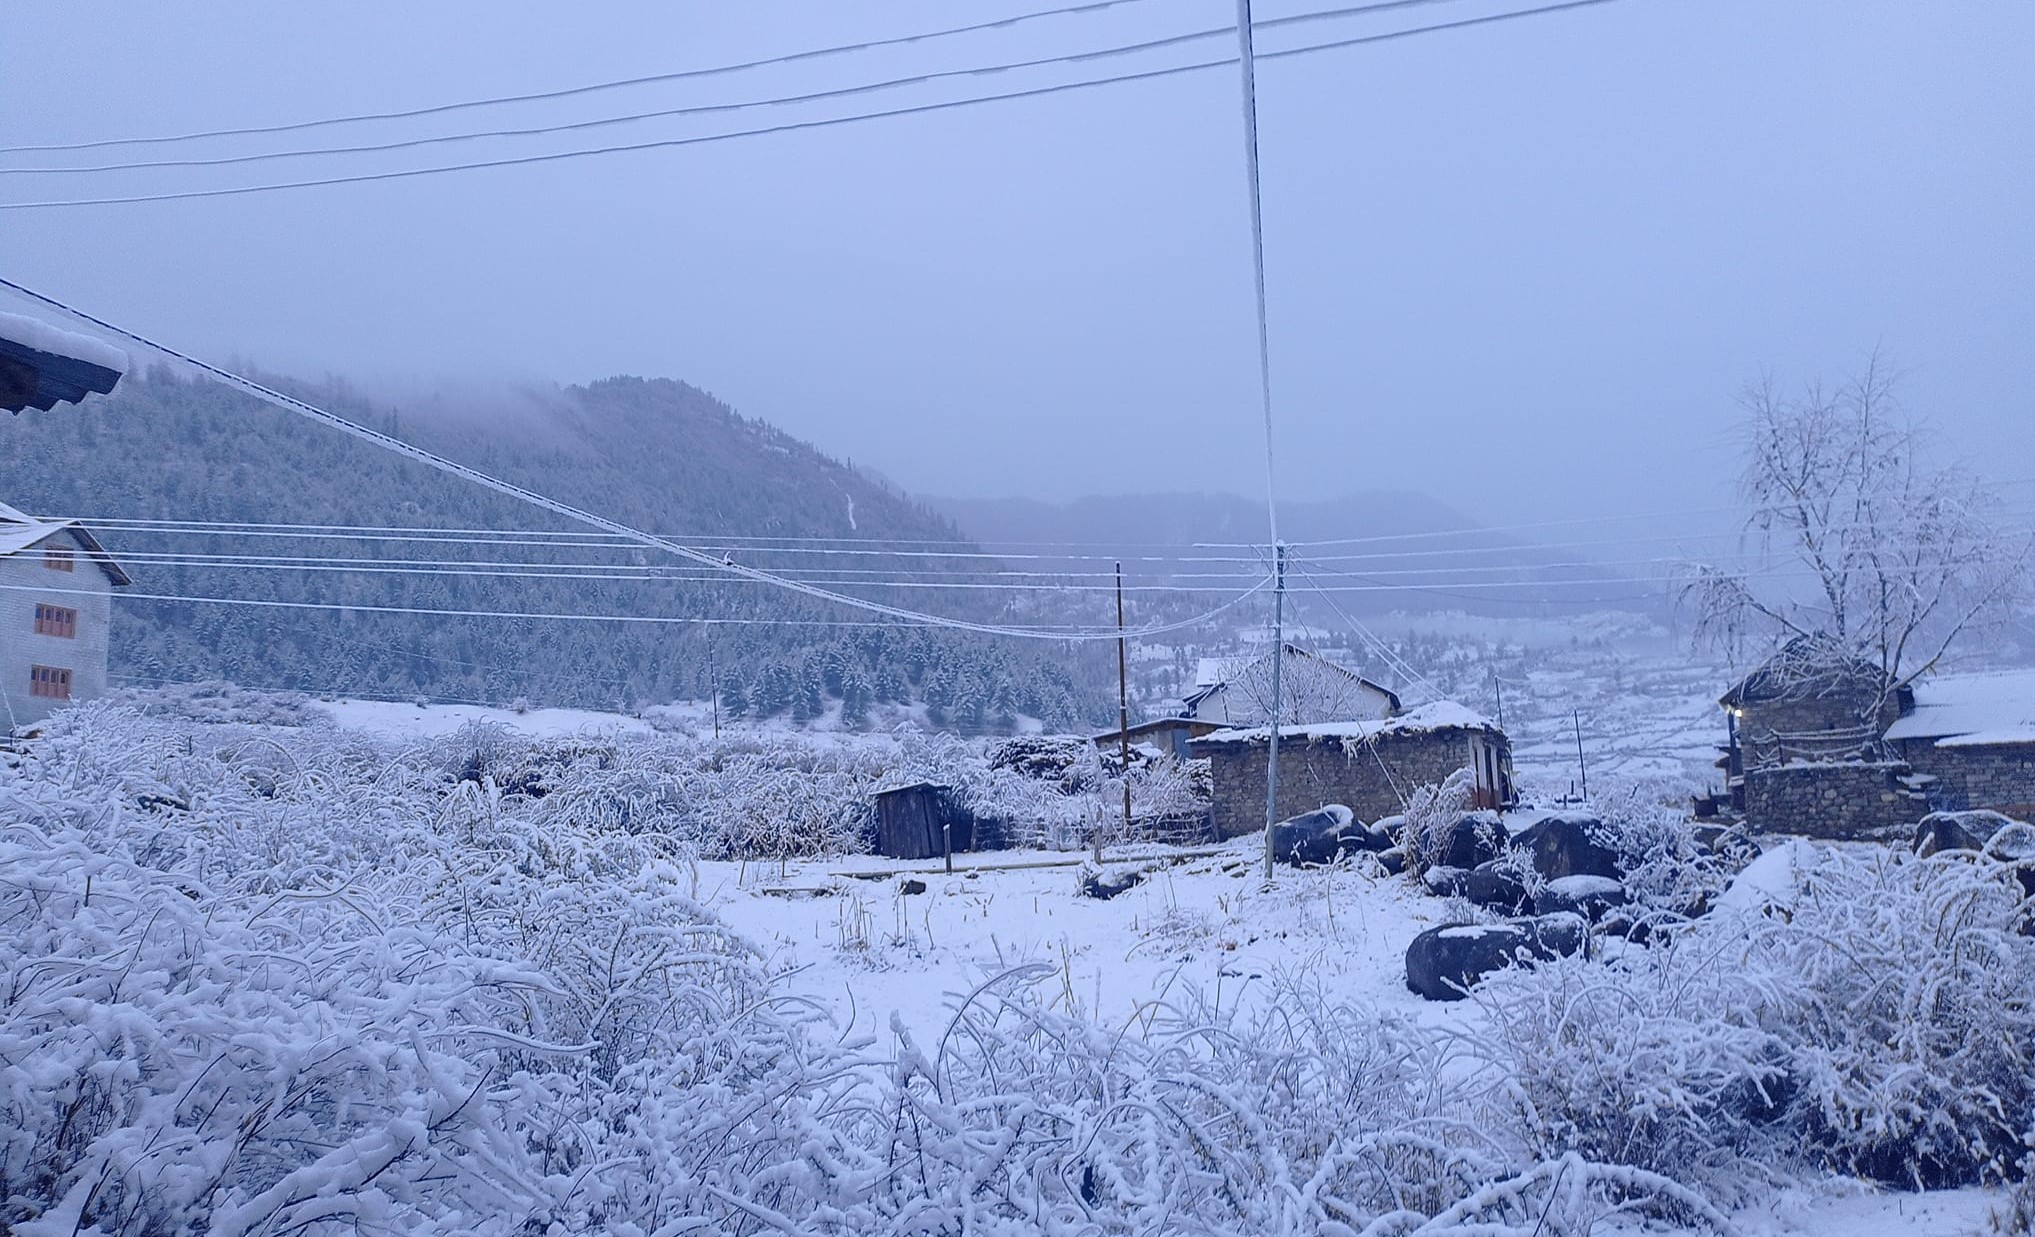 snowfall-affects-normal-life-in-himalayan-region